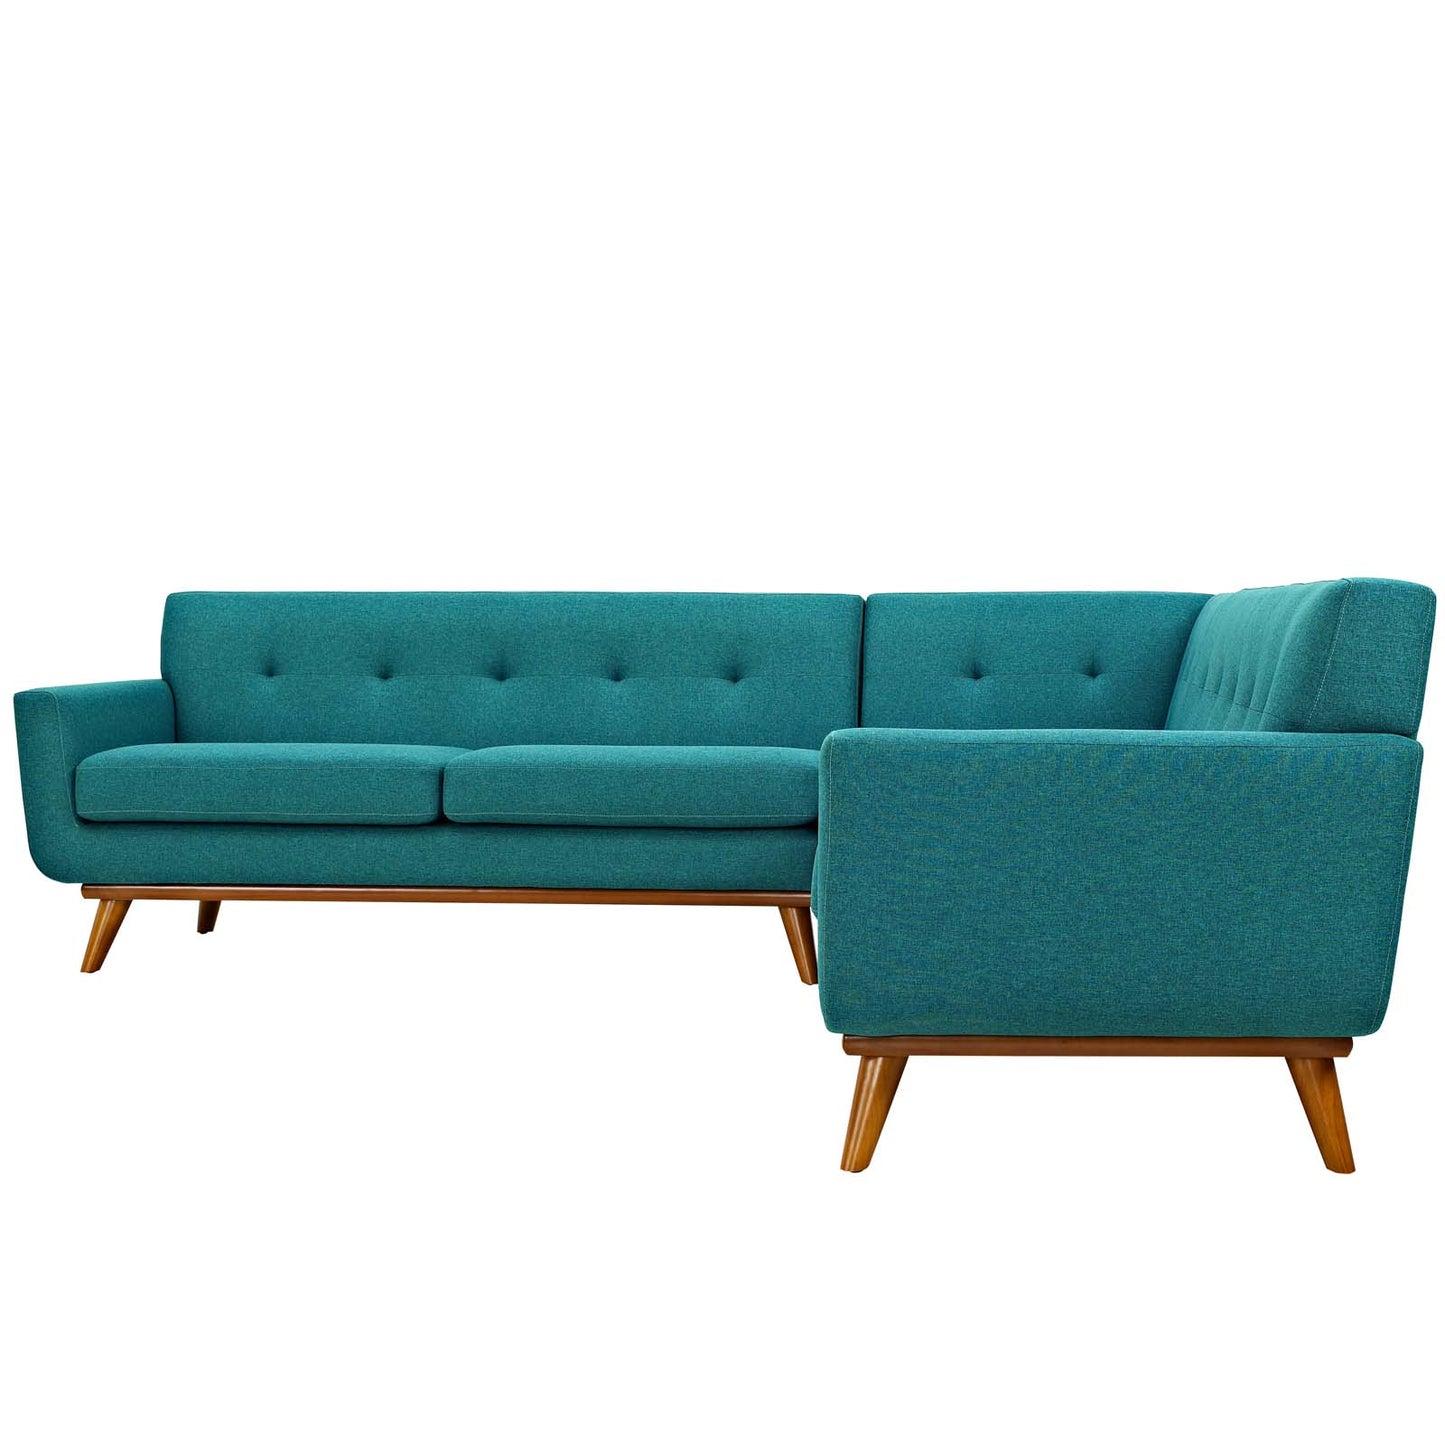 Engage L-Shaped Upholstered Fabric Sectional Sofa EEI-2108 Teal